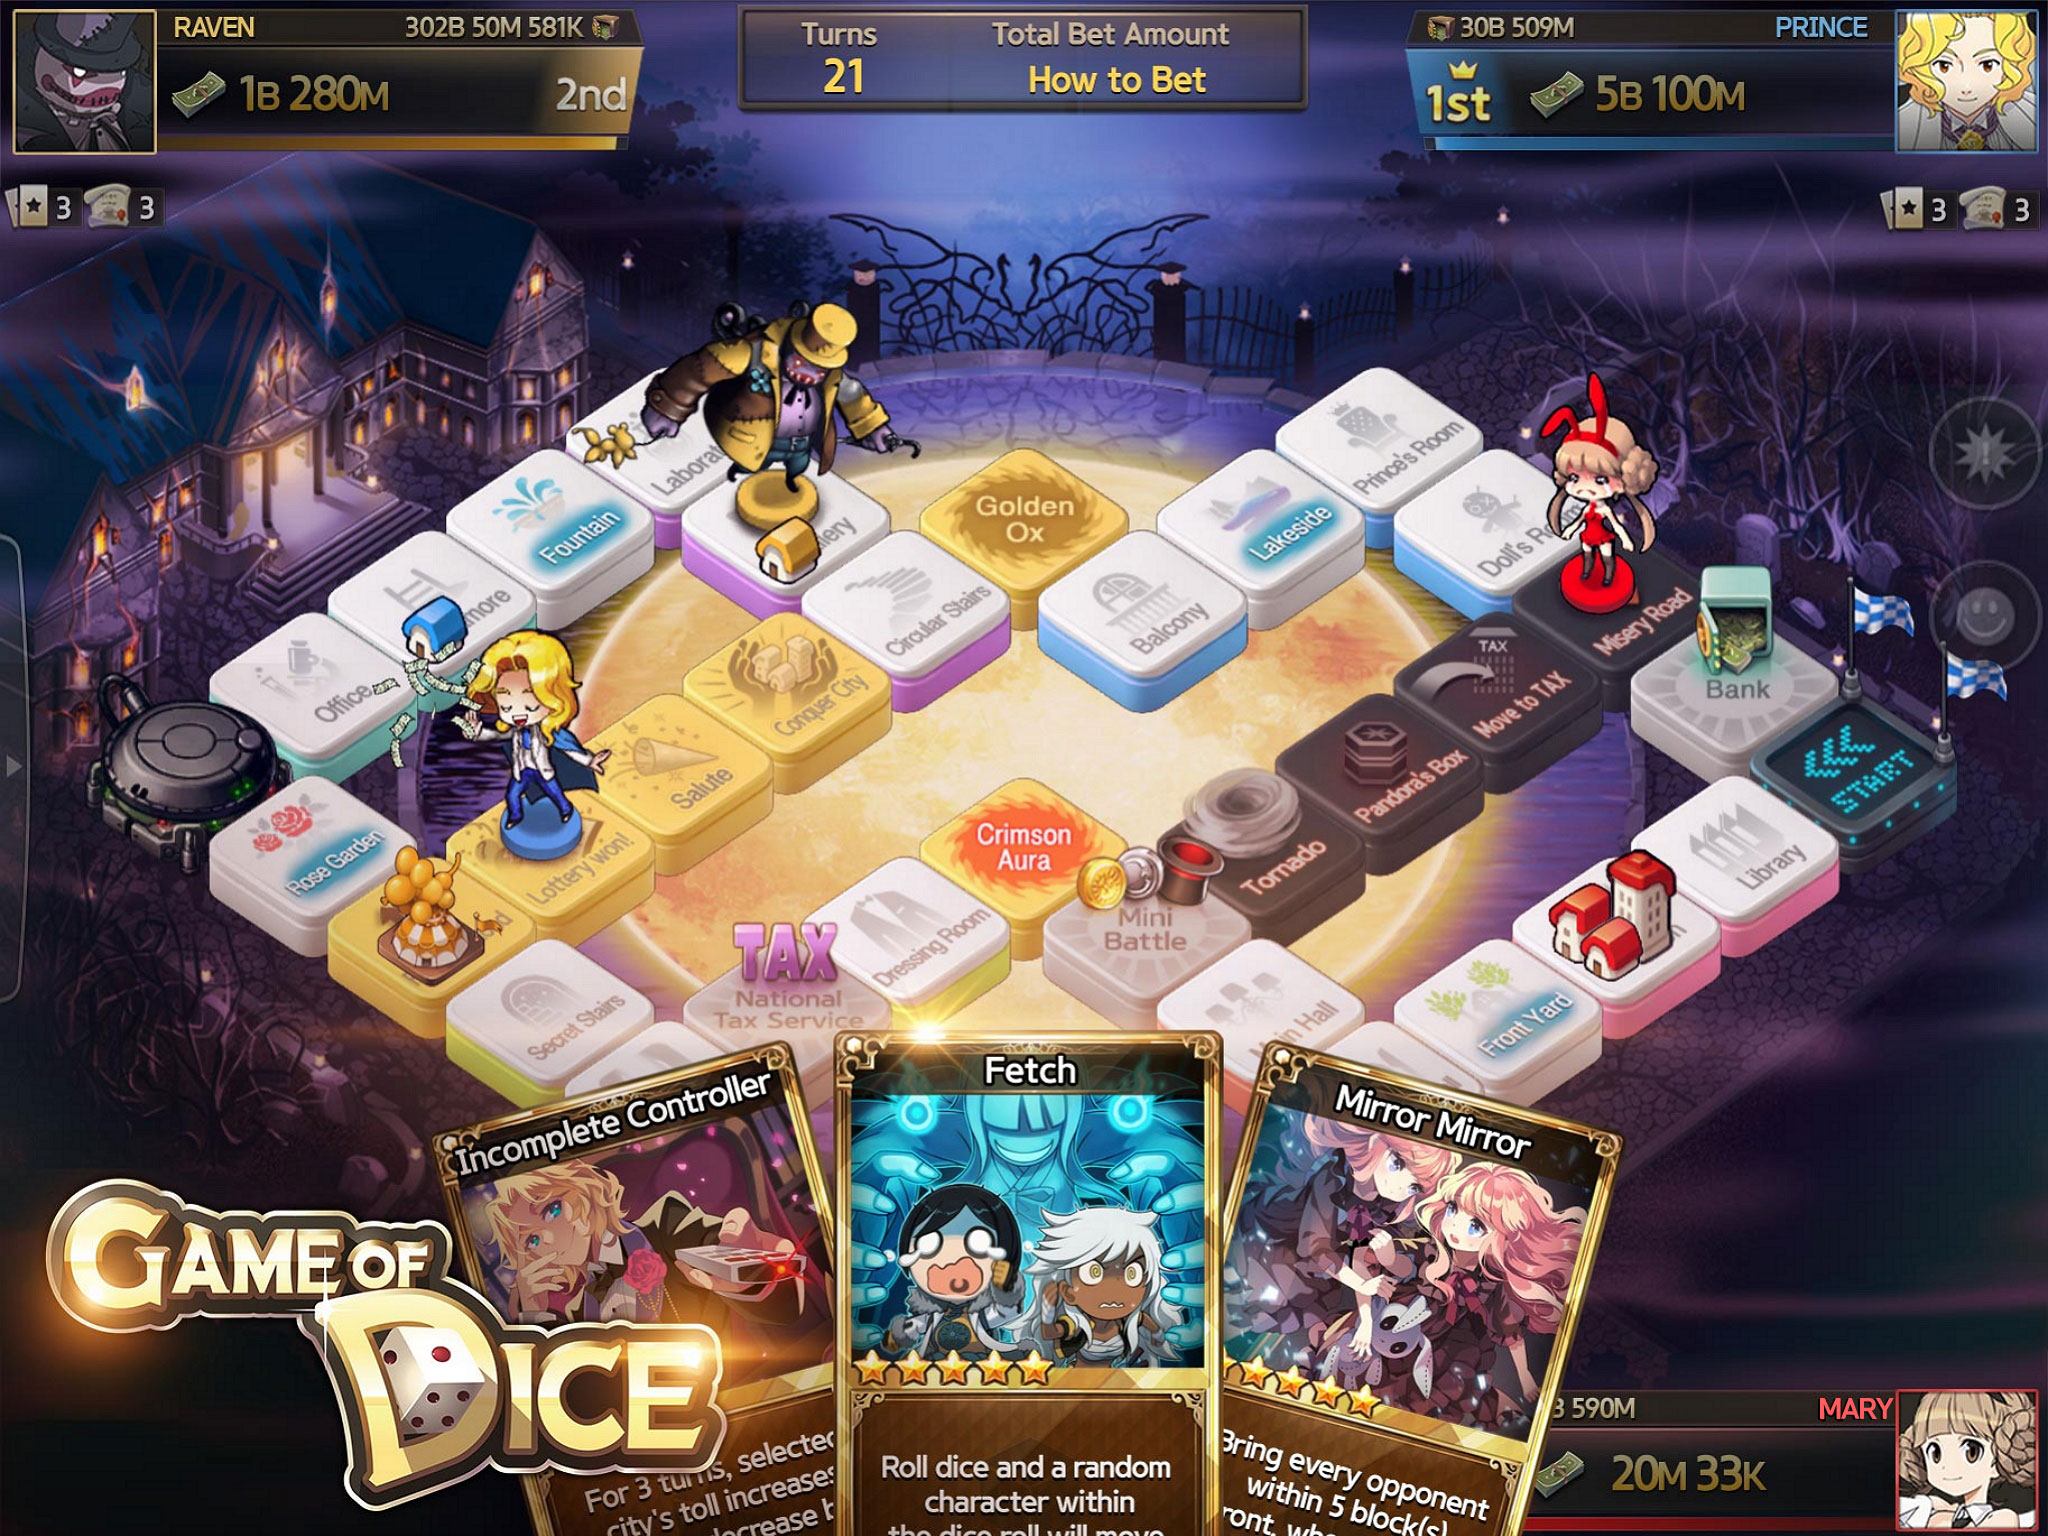 game of dice mistery_en_2048-1536_2